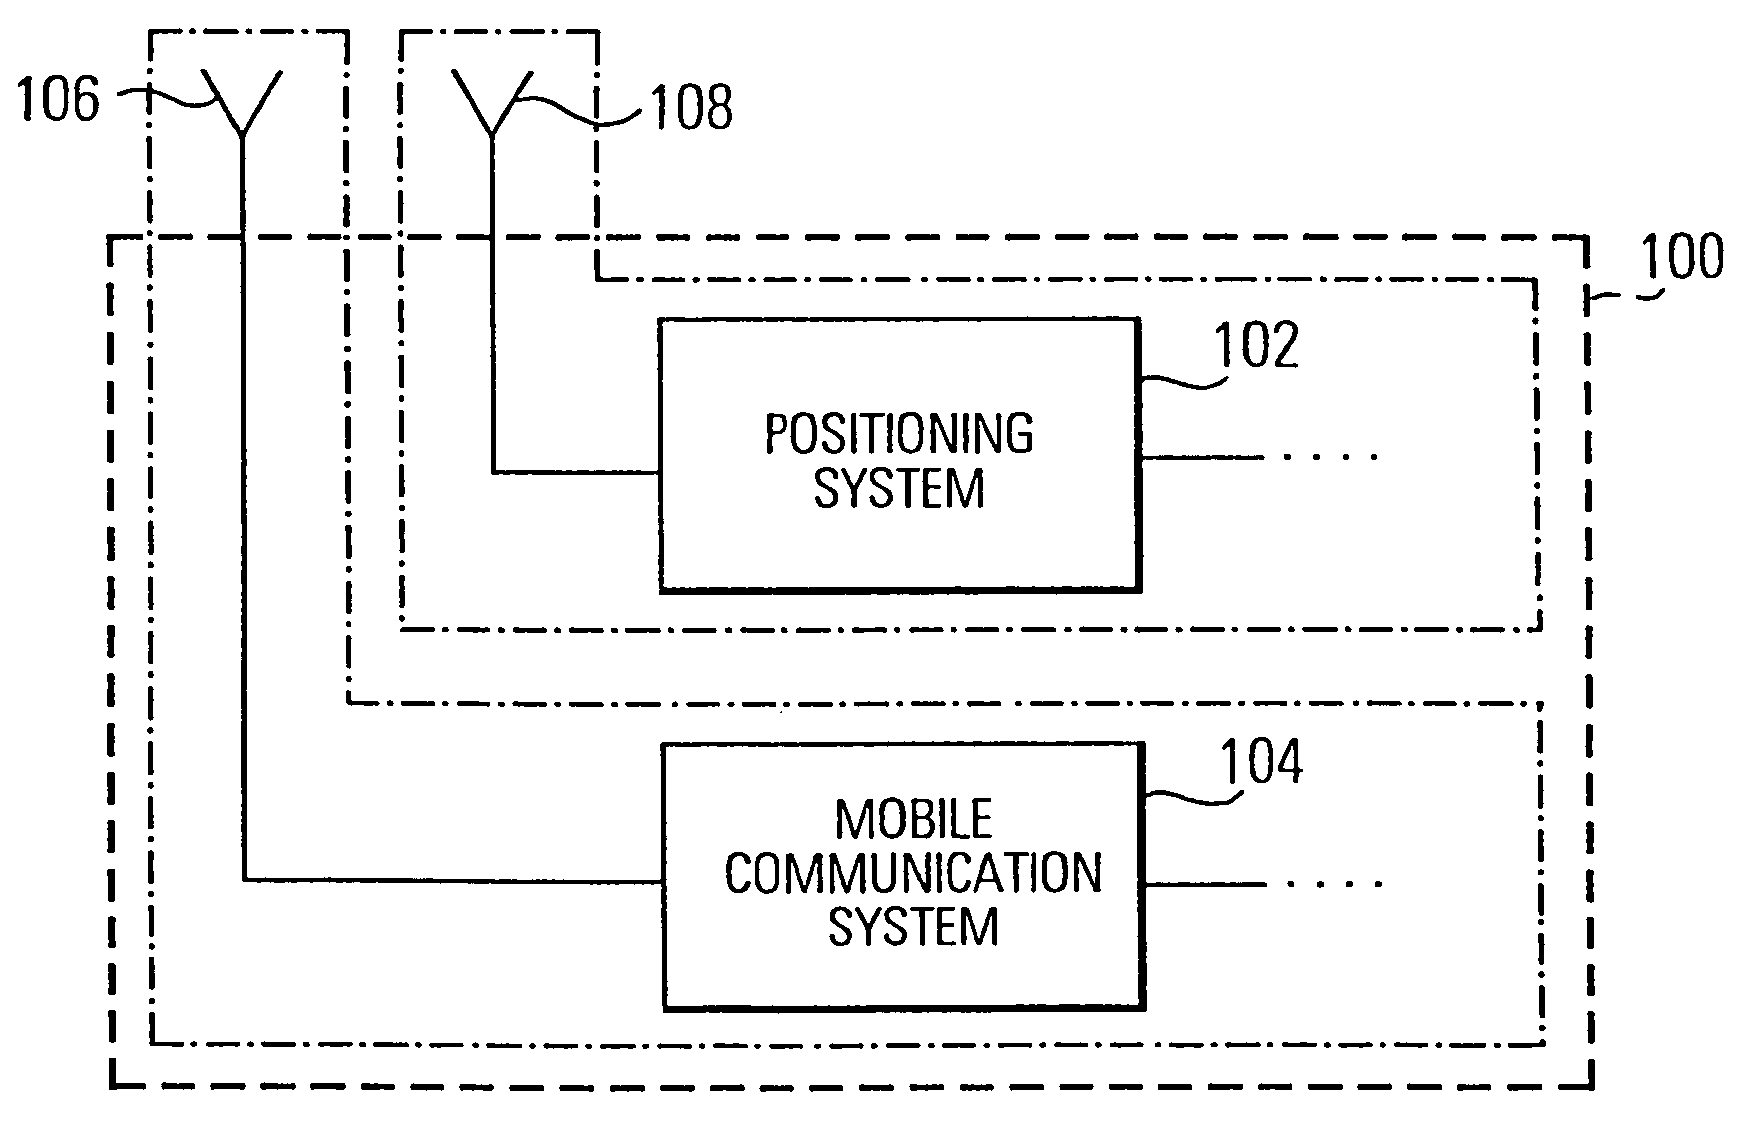 Parallel operation of devices using multiple communication standards